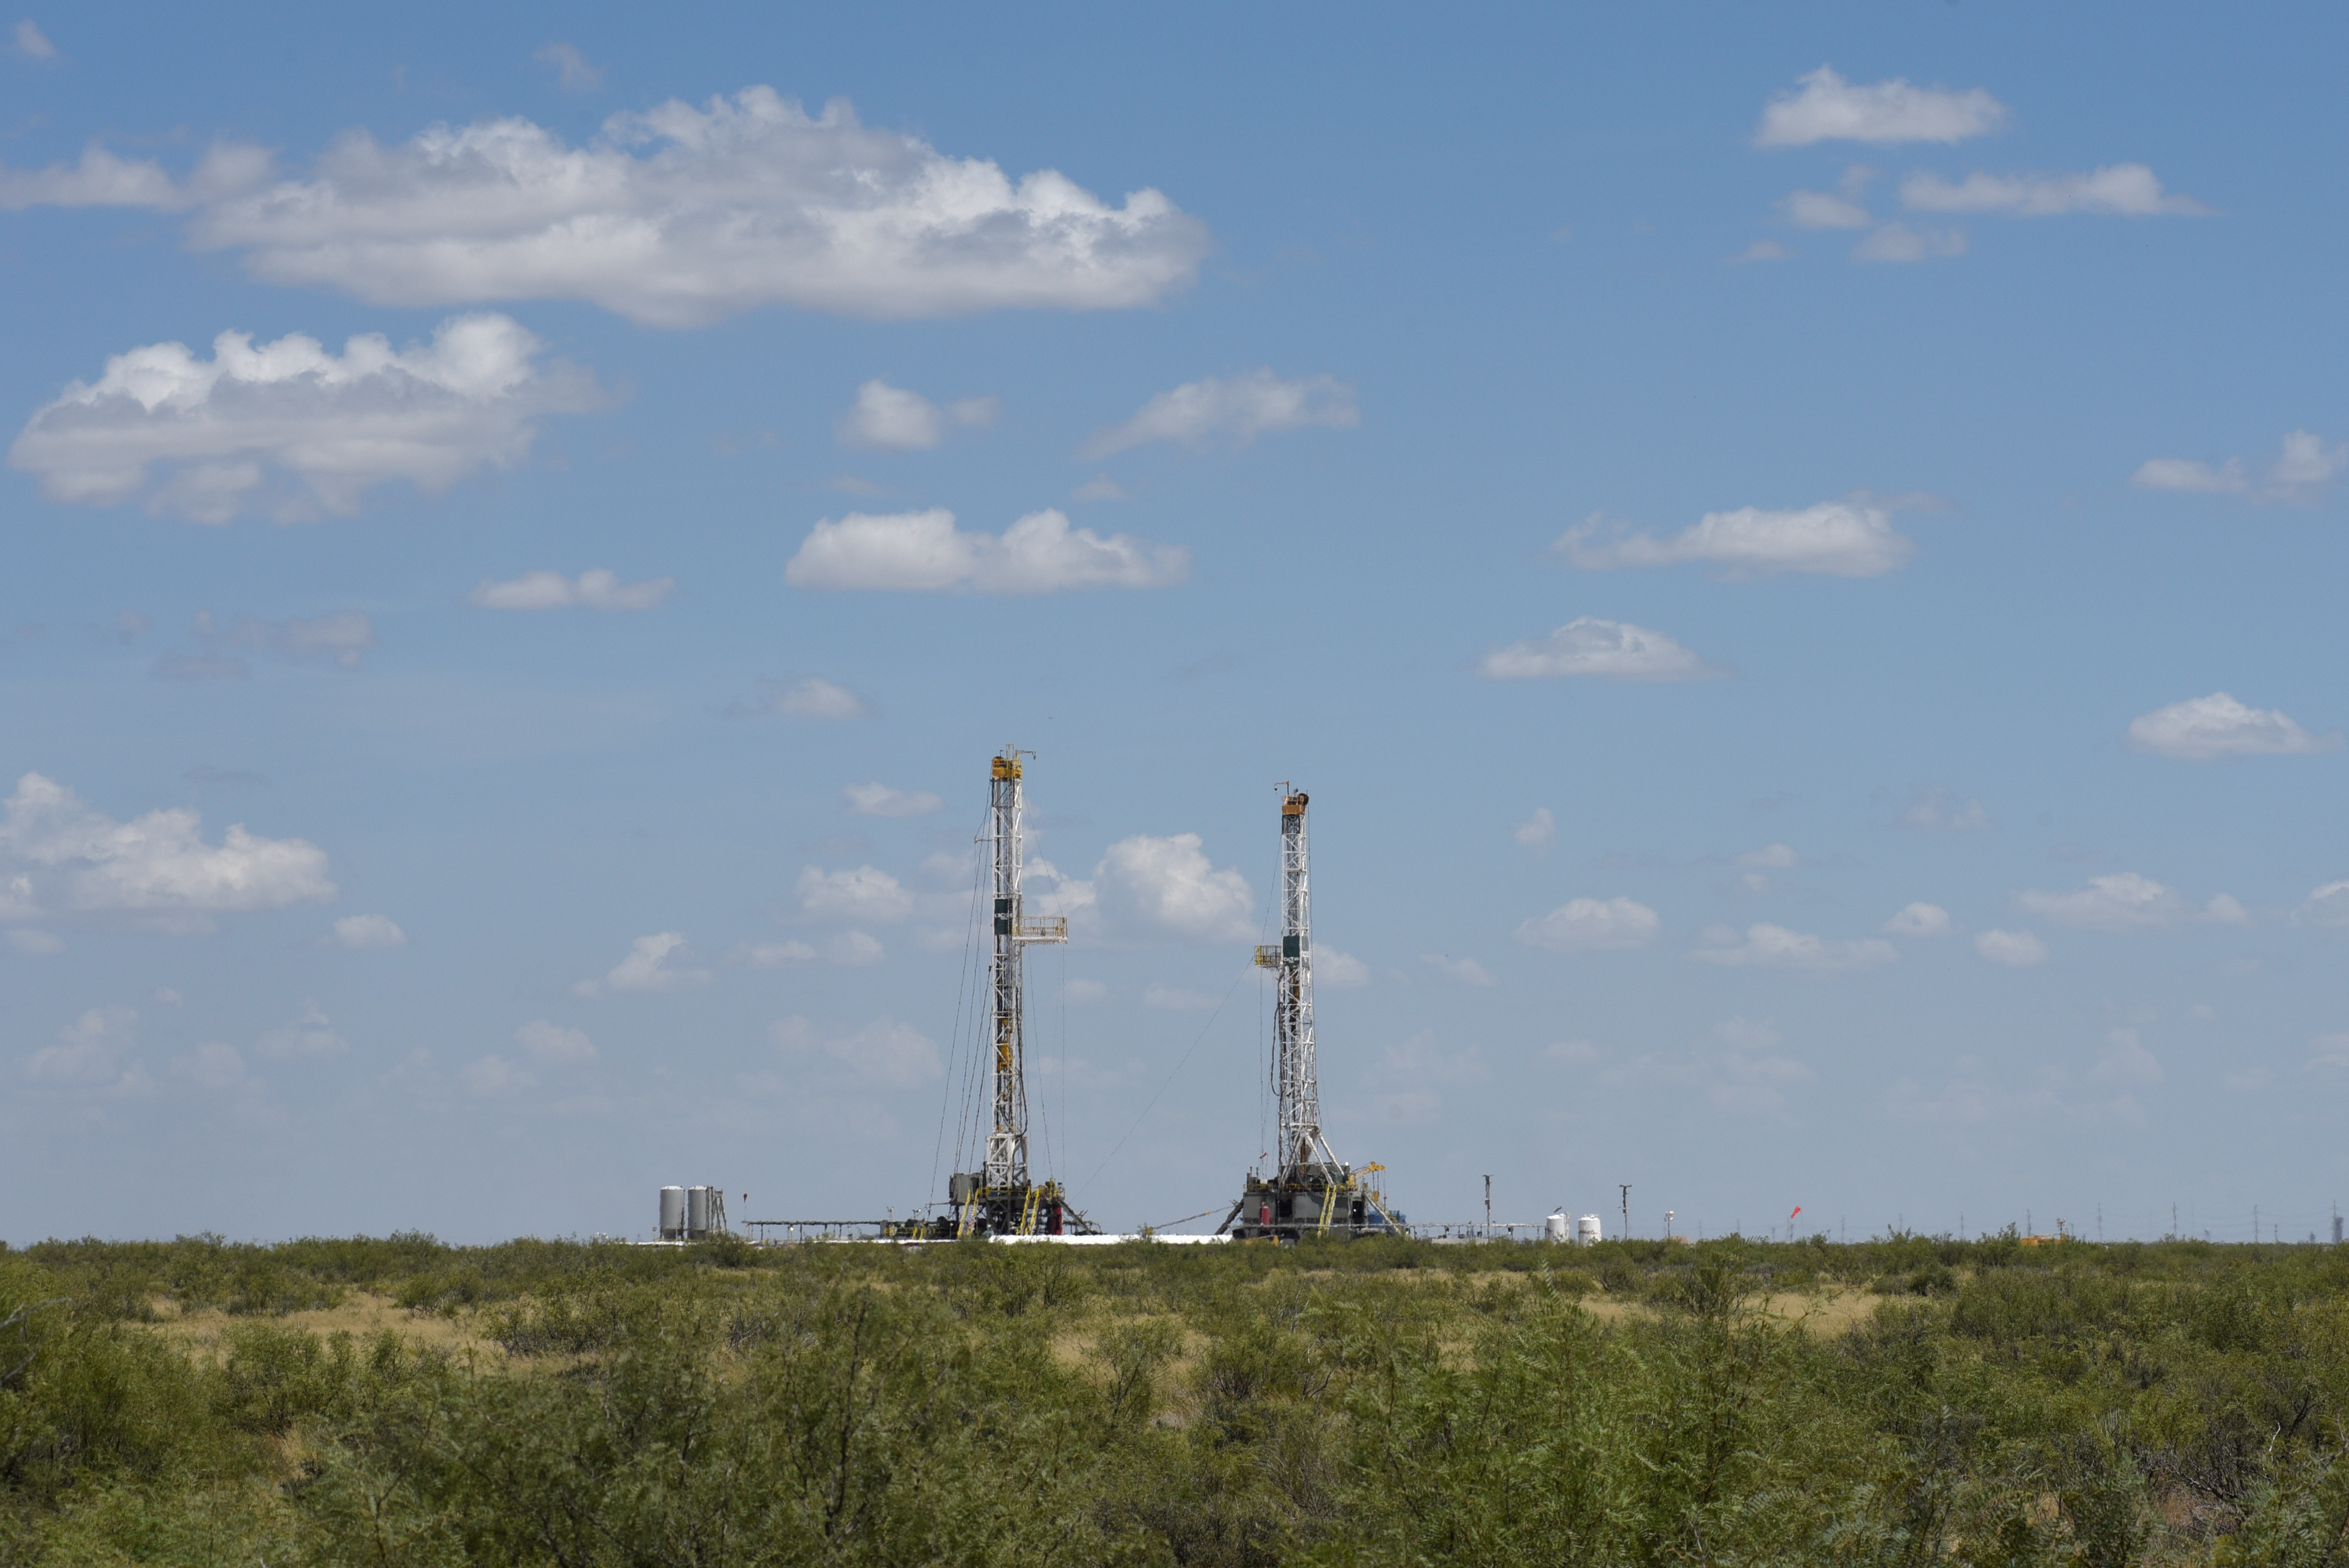 Horizontal drilling rigs operate in the Permian Basin oil production area near Wink